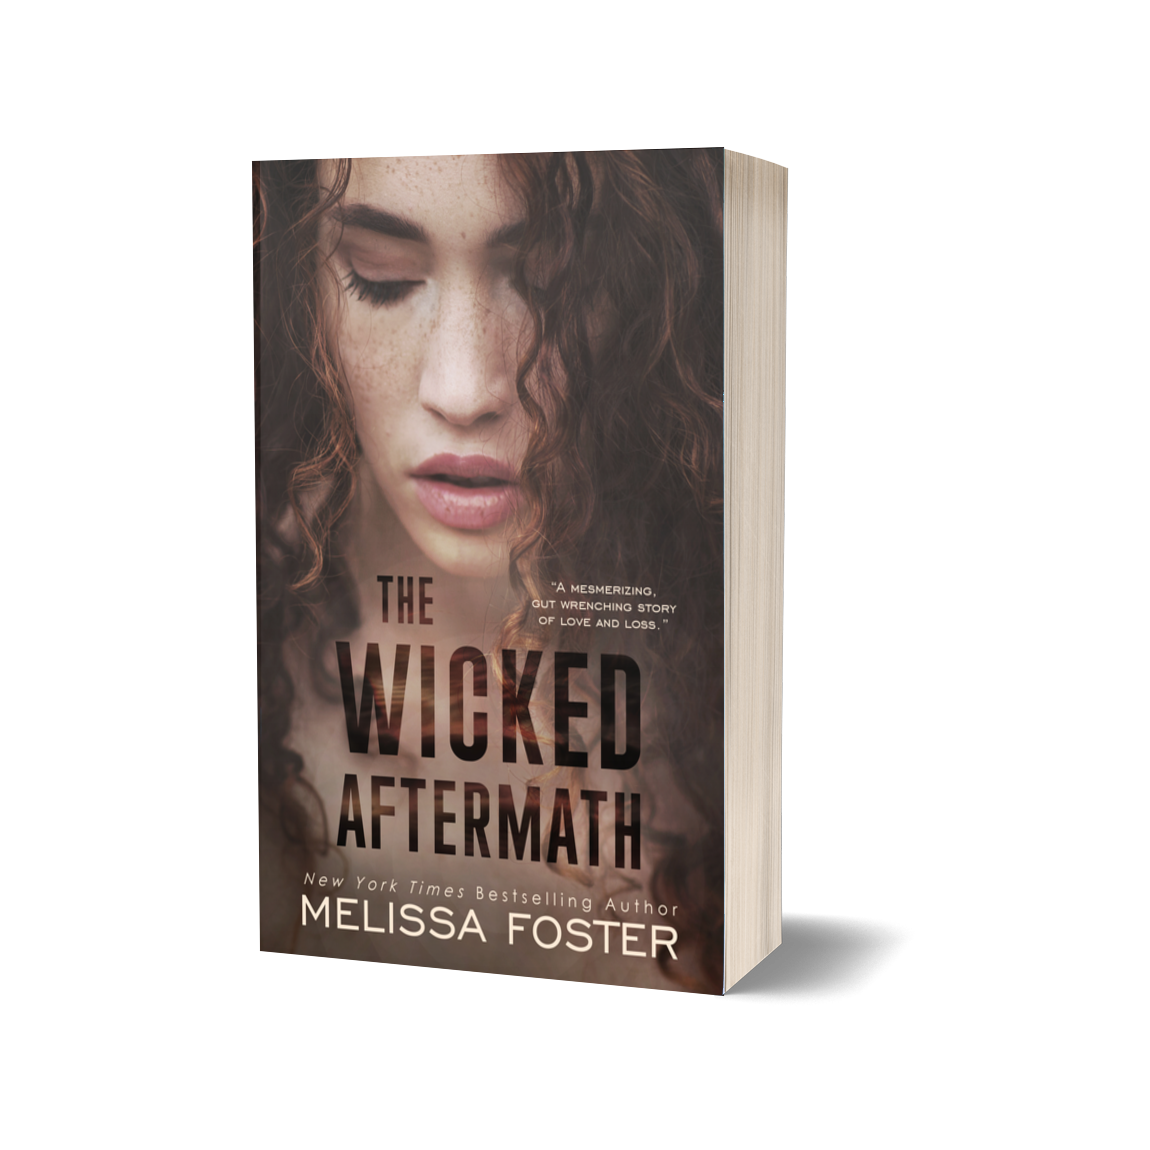 The Wicked Aftermath Special Edition Paperback